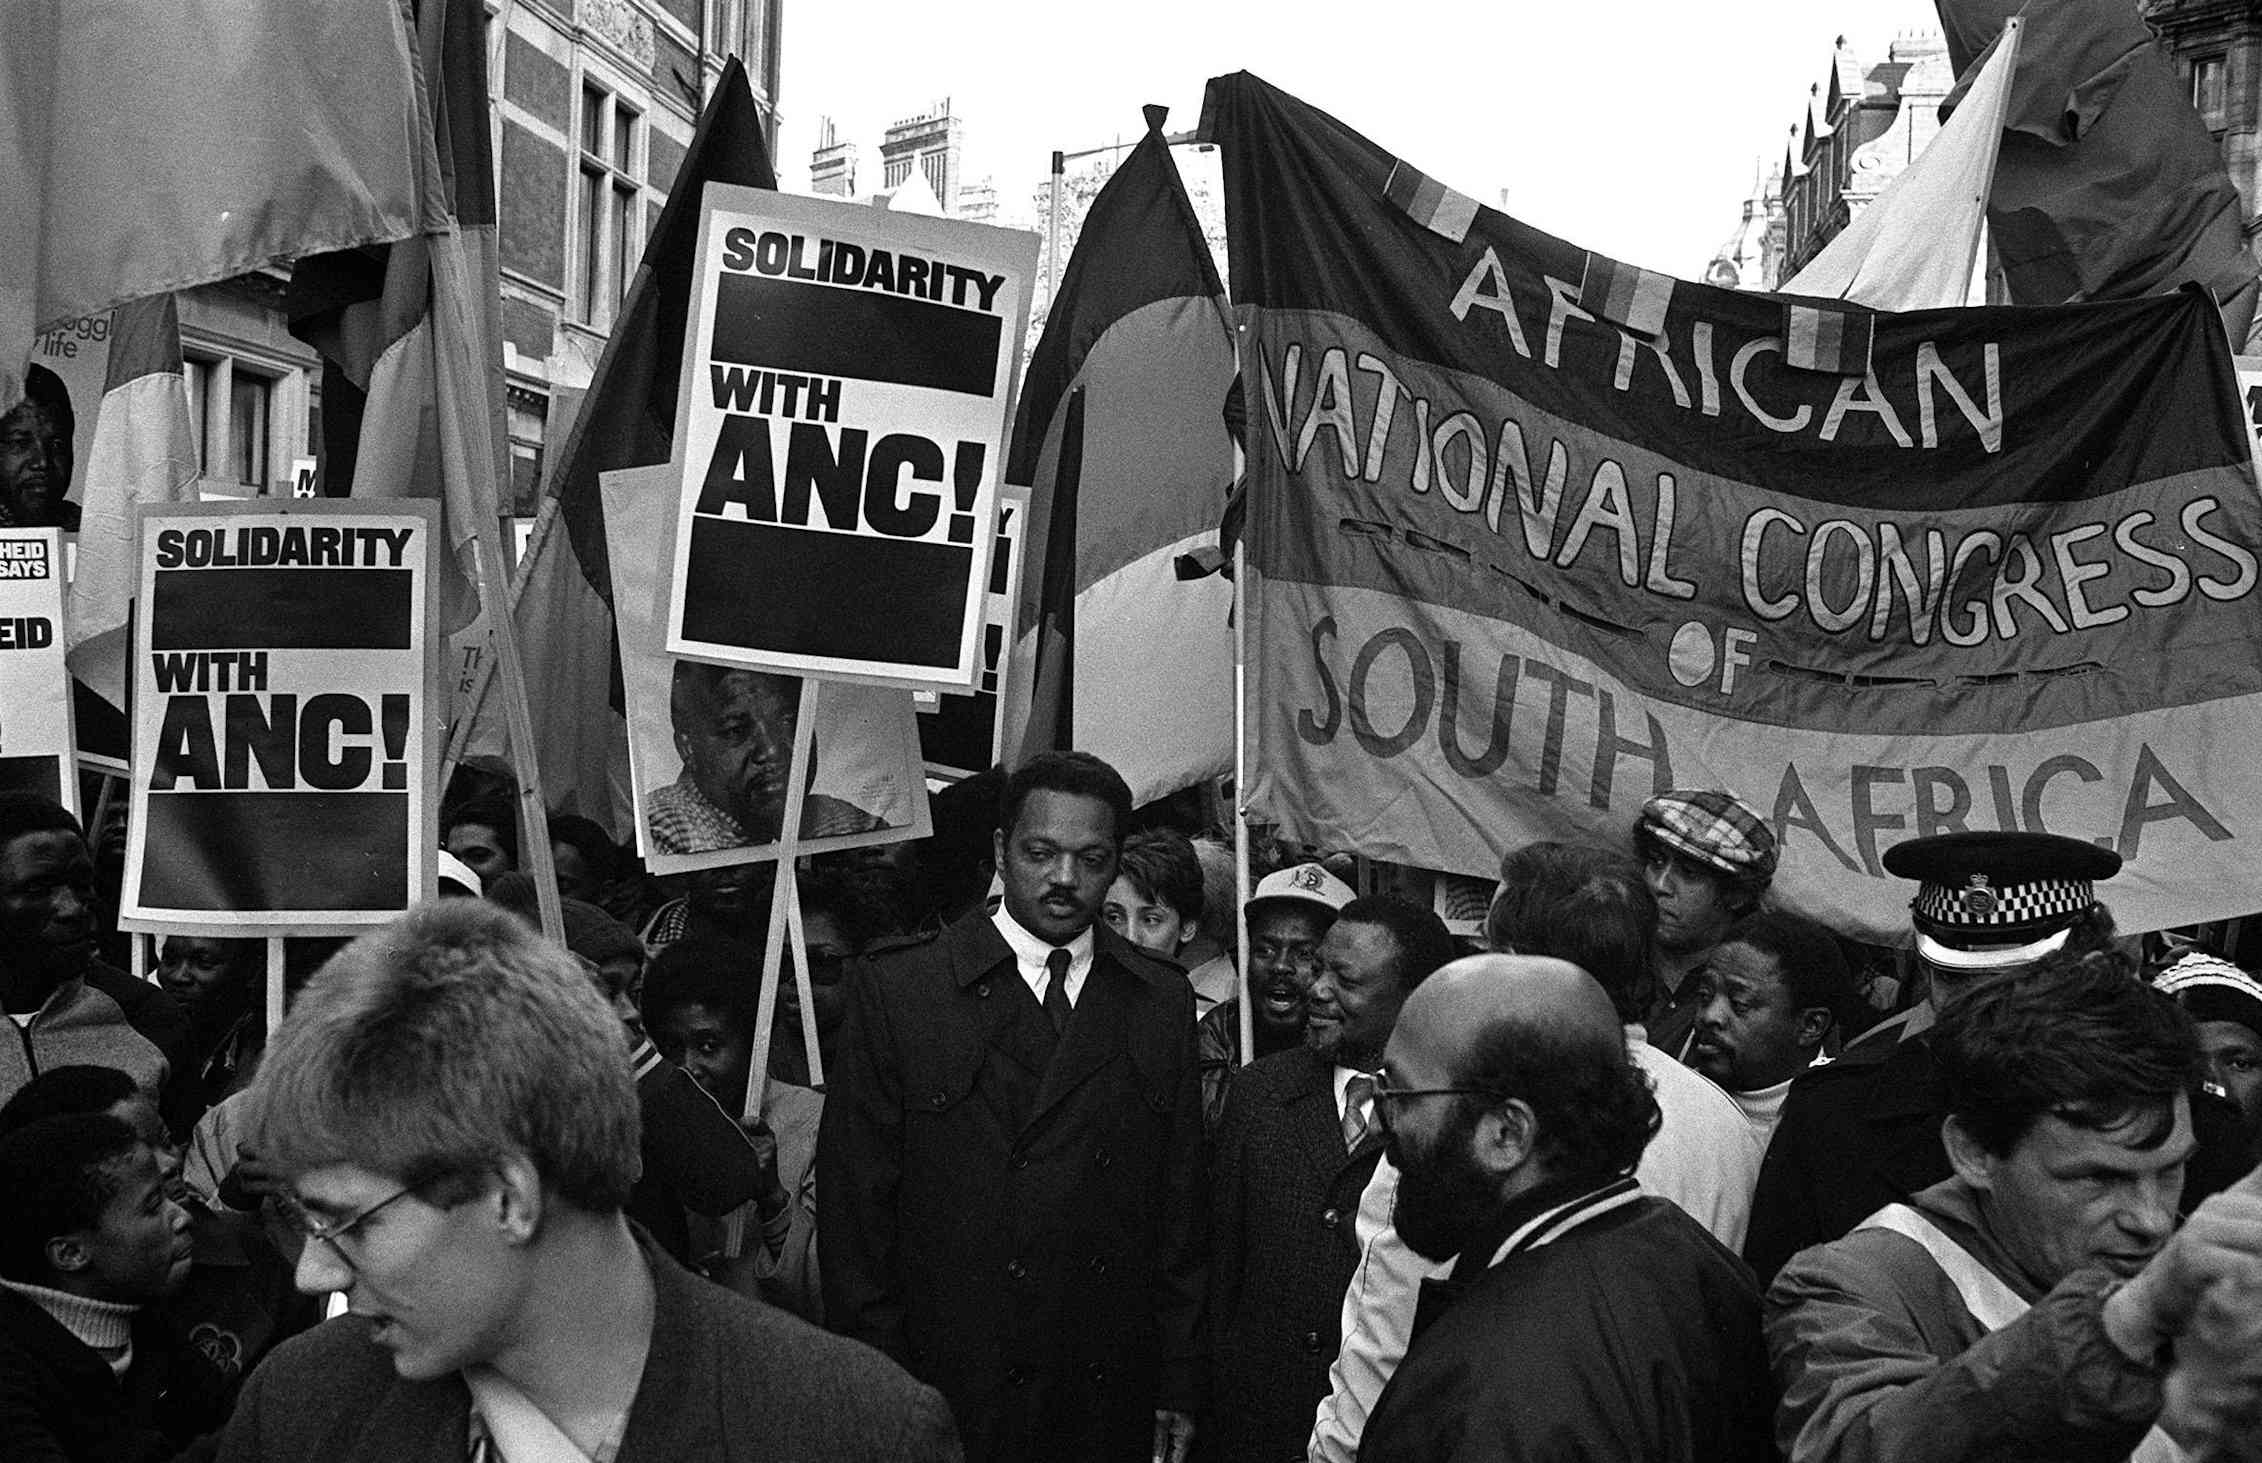 civil resistance in south africa 1970s to 1980s essay